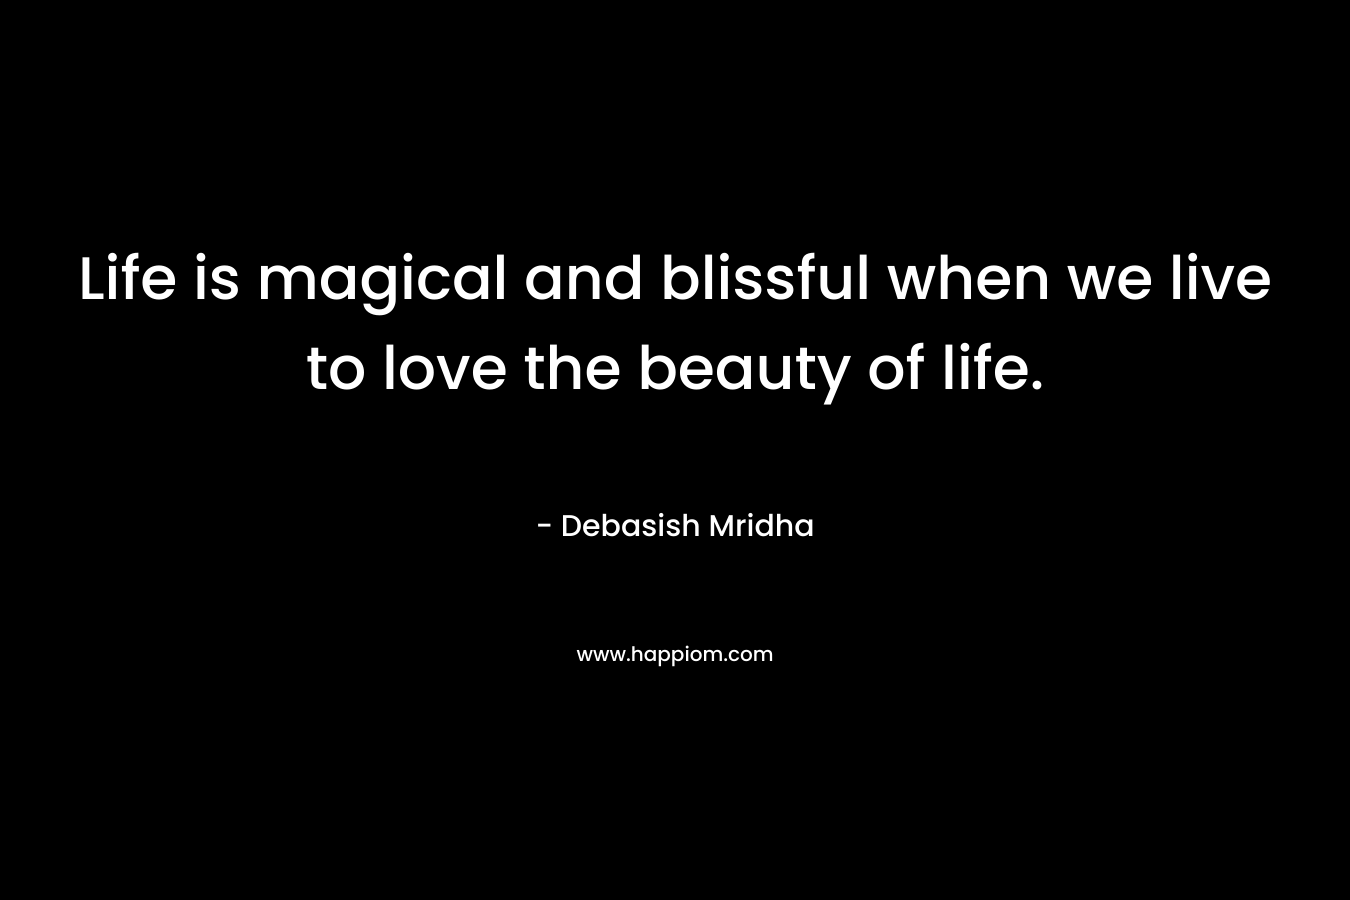 Life is magical and blissful when we live to love the beauty of life.